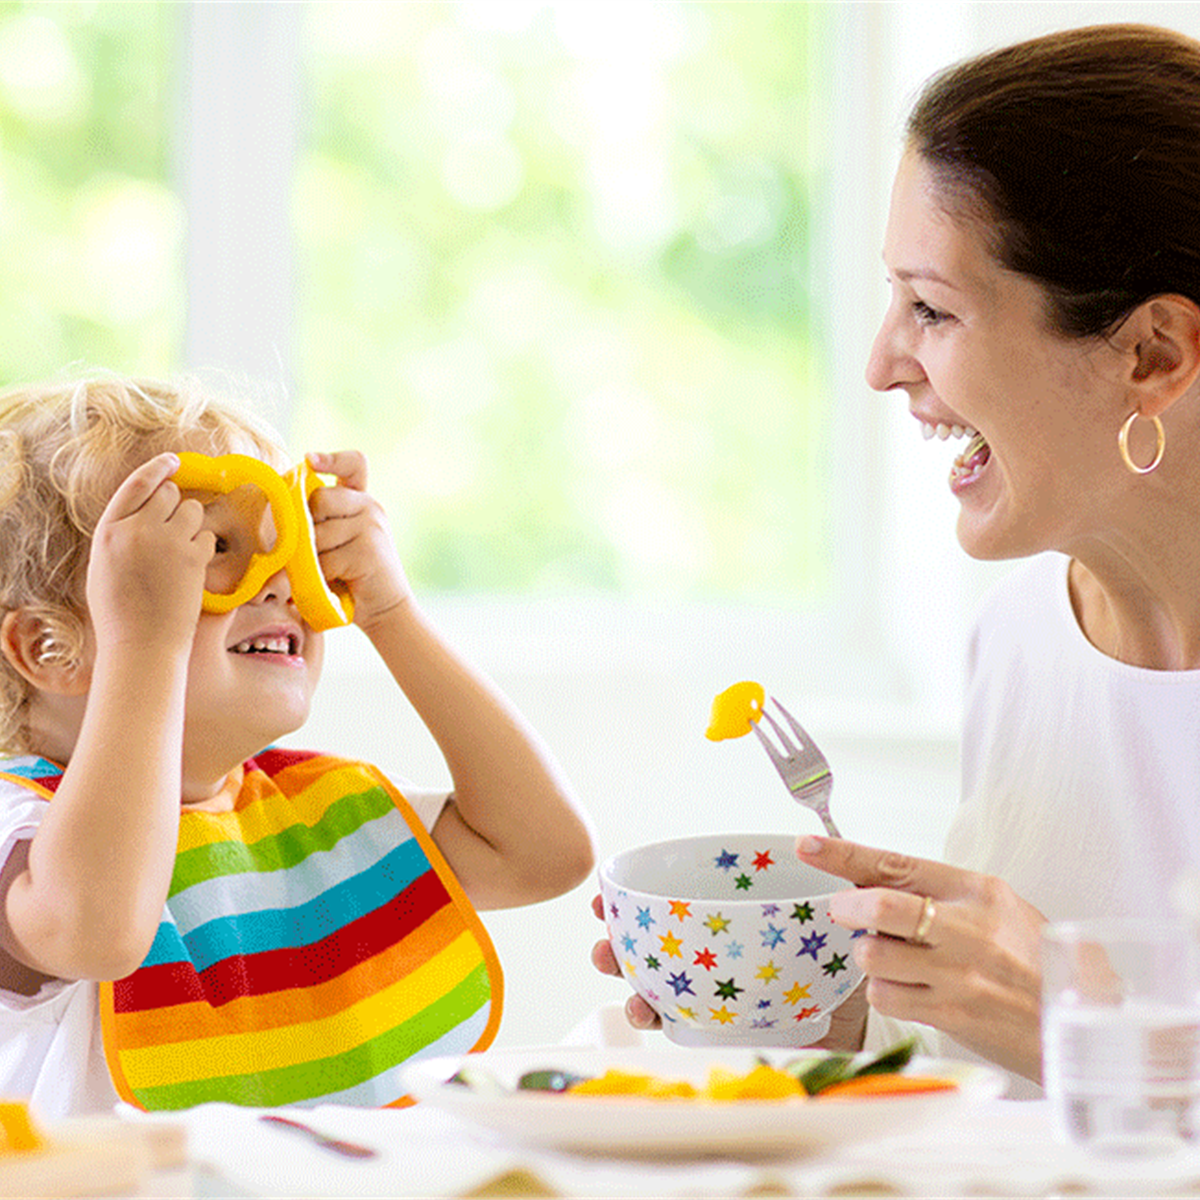 Selecting Healthy Snacks for Toddlers - HealthyChildren.org